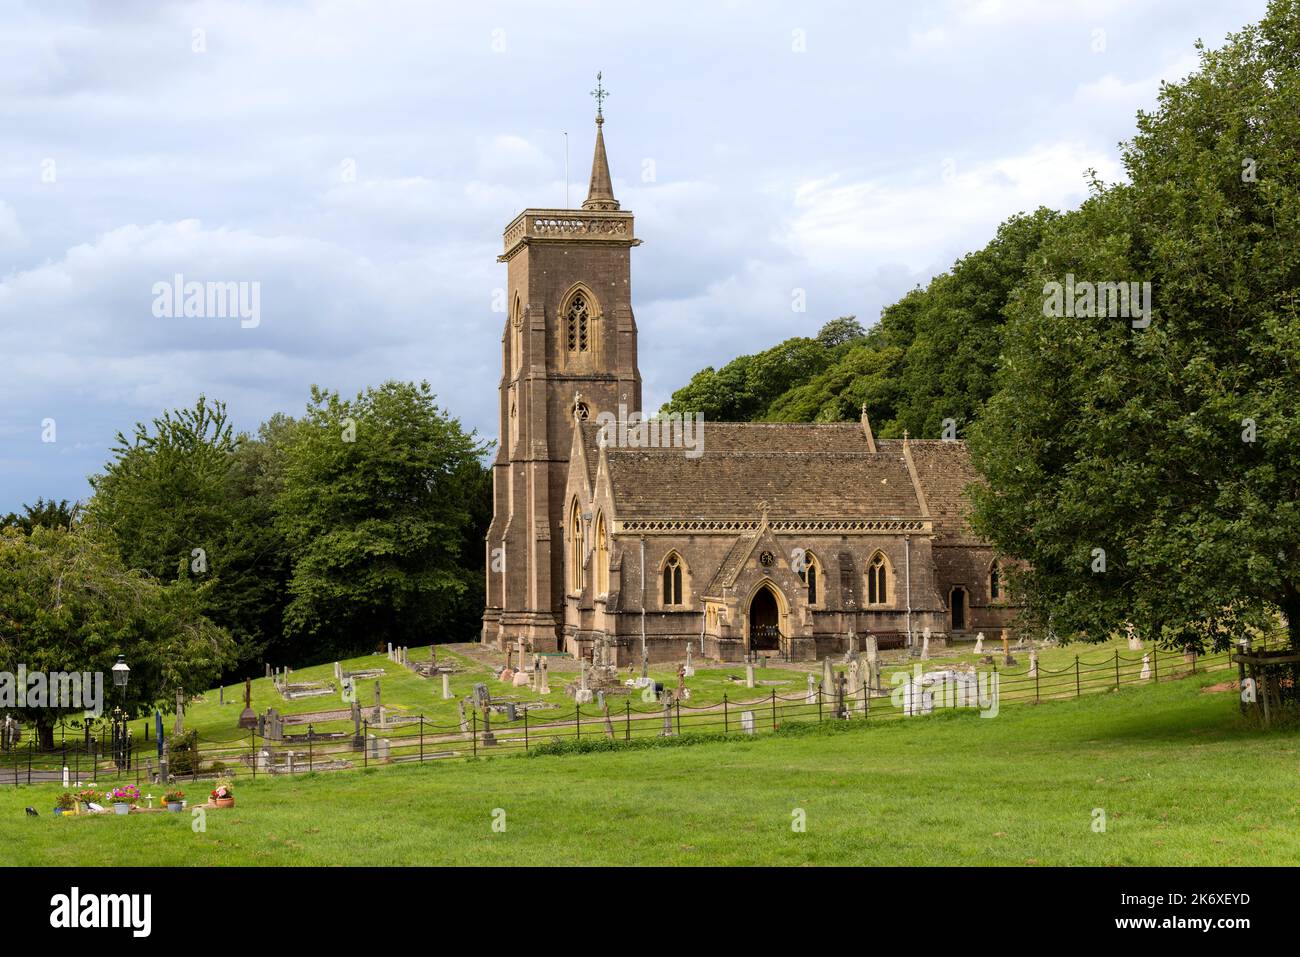 St Etheldreda Church or St Audries, West Quantoxhead, Somerset, England, Great Britain, United Kingdom. Stock Photo